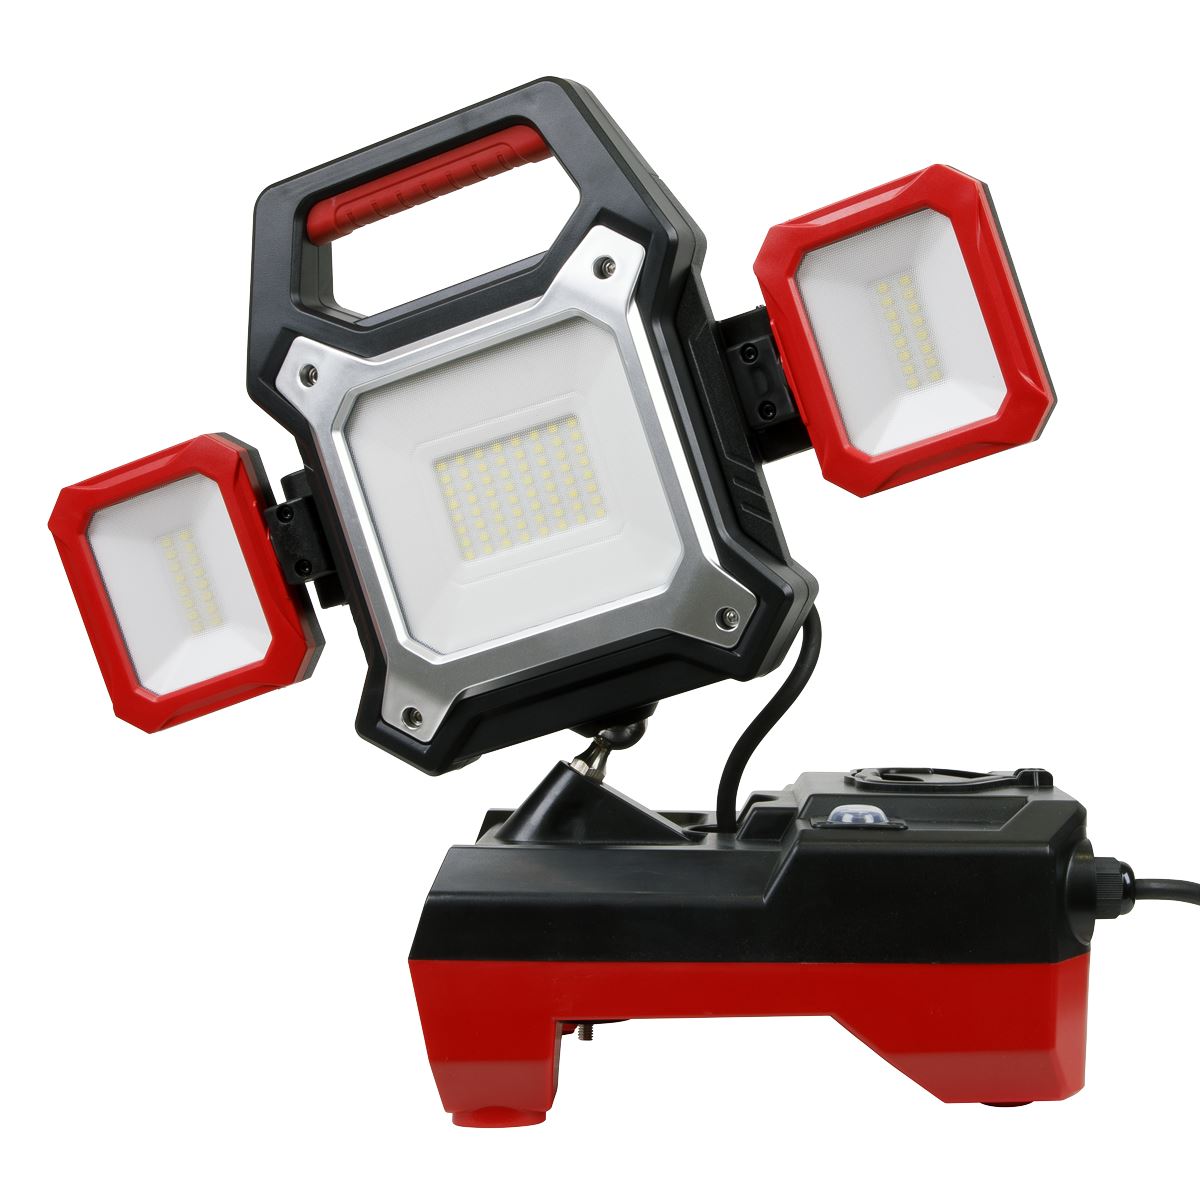 Sealey Cordless 20V SV20 Series 2-in-1 45W SMD LED Worklight - Body Only